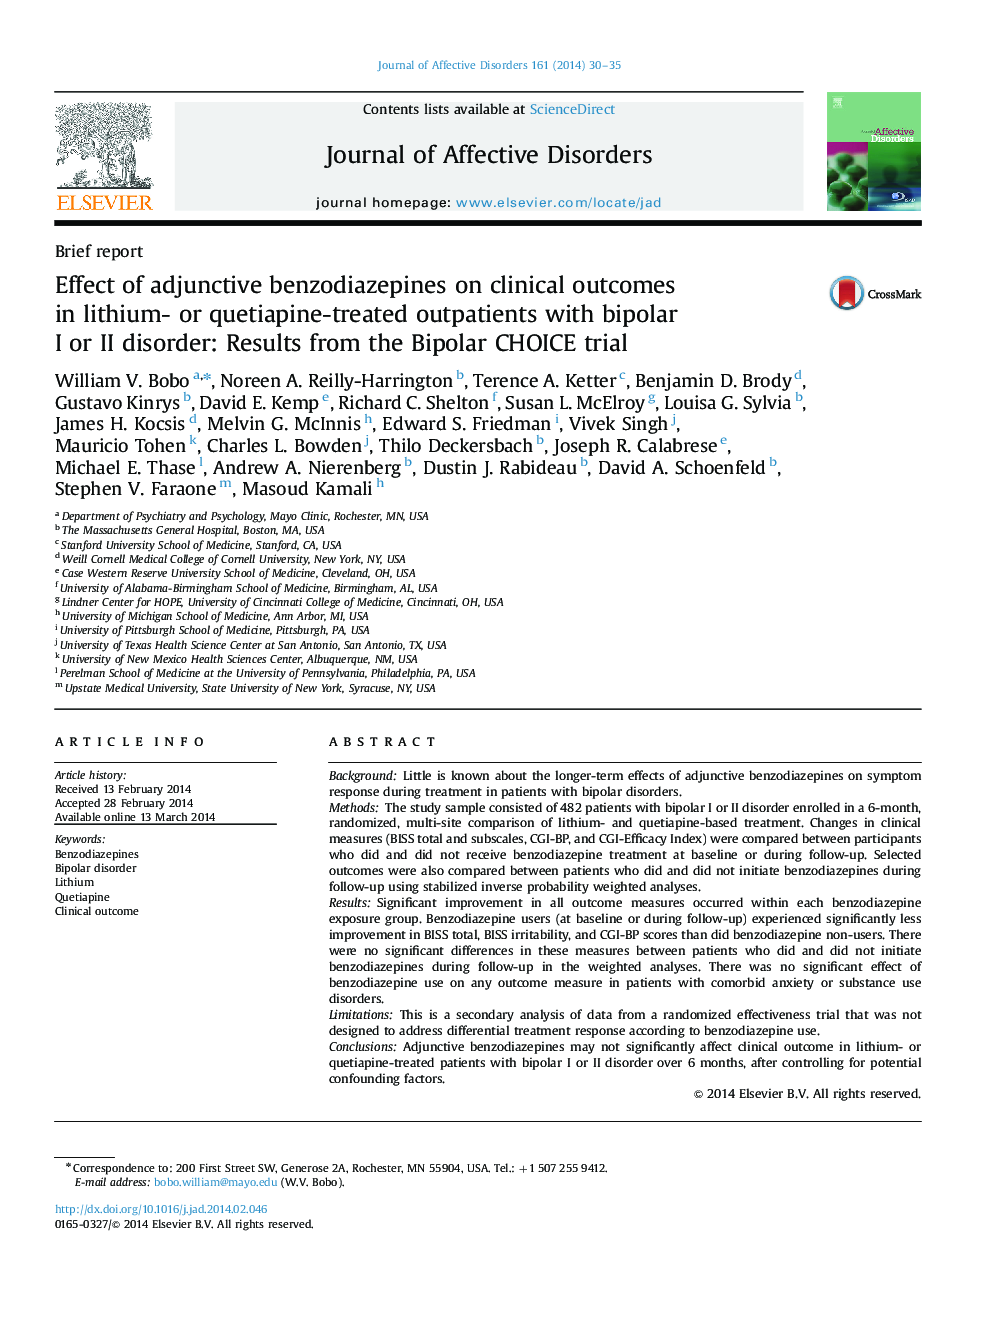 Effect of adjunctive benzodiazepines on clinical outcomes in lithium- or quetiapine-treated outpatients with bipolar I or II disorder: Results from the Bipolar CHOICE trial